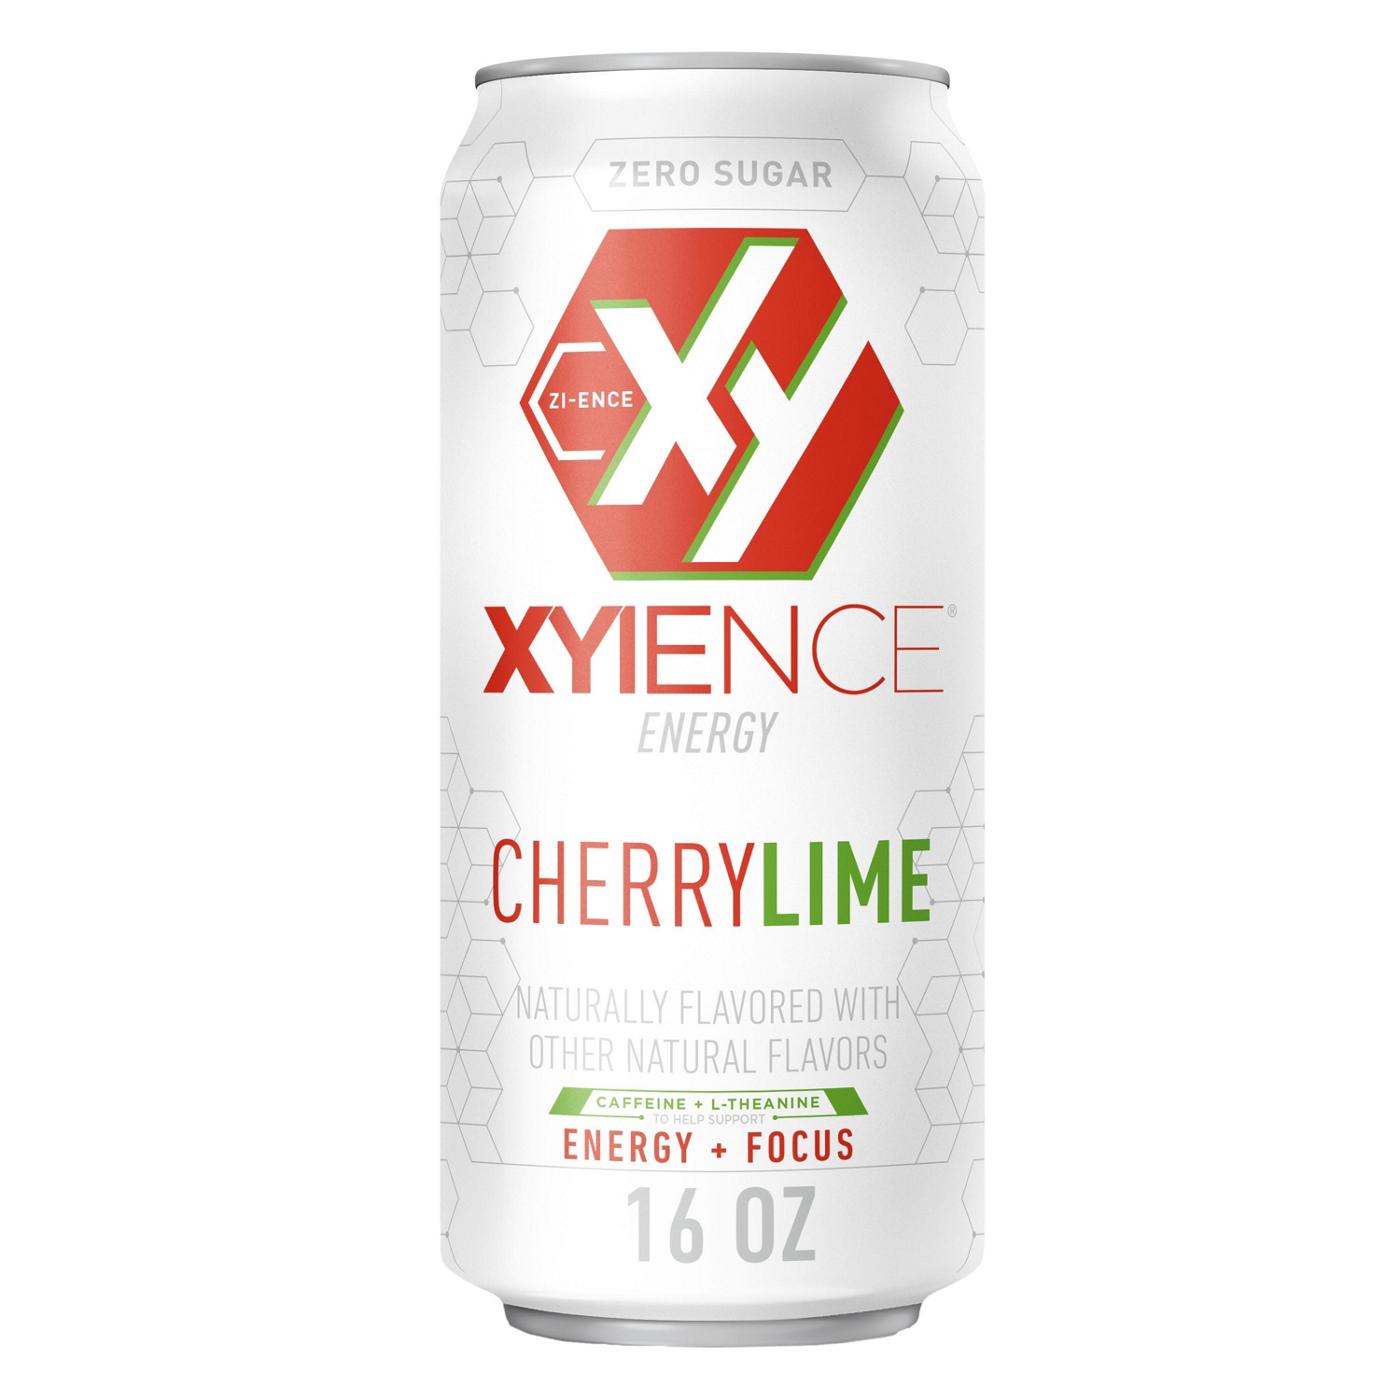 XYIENCE Zero Sugar Energy Drink - Cherry Lime; image 1 of 6